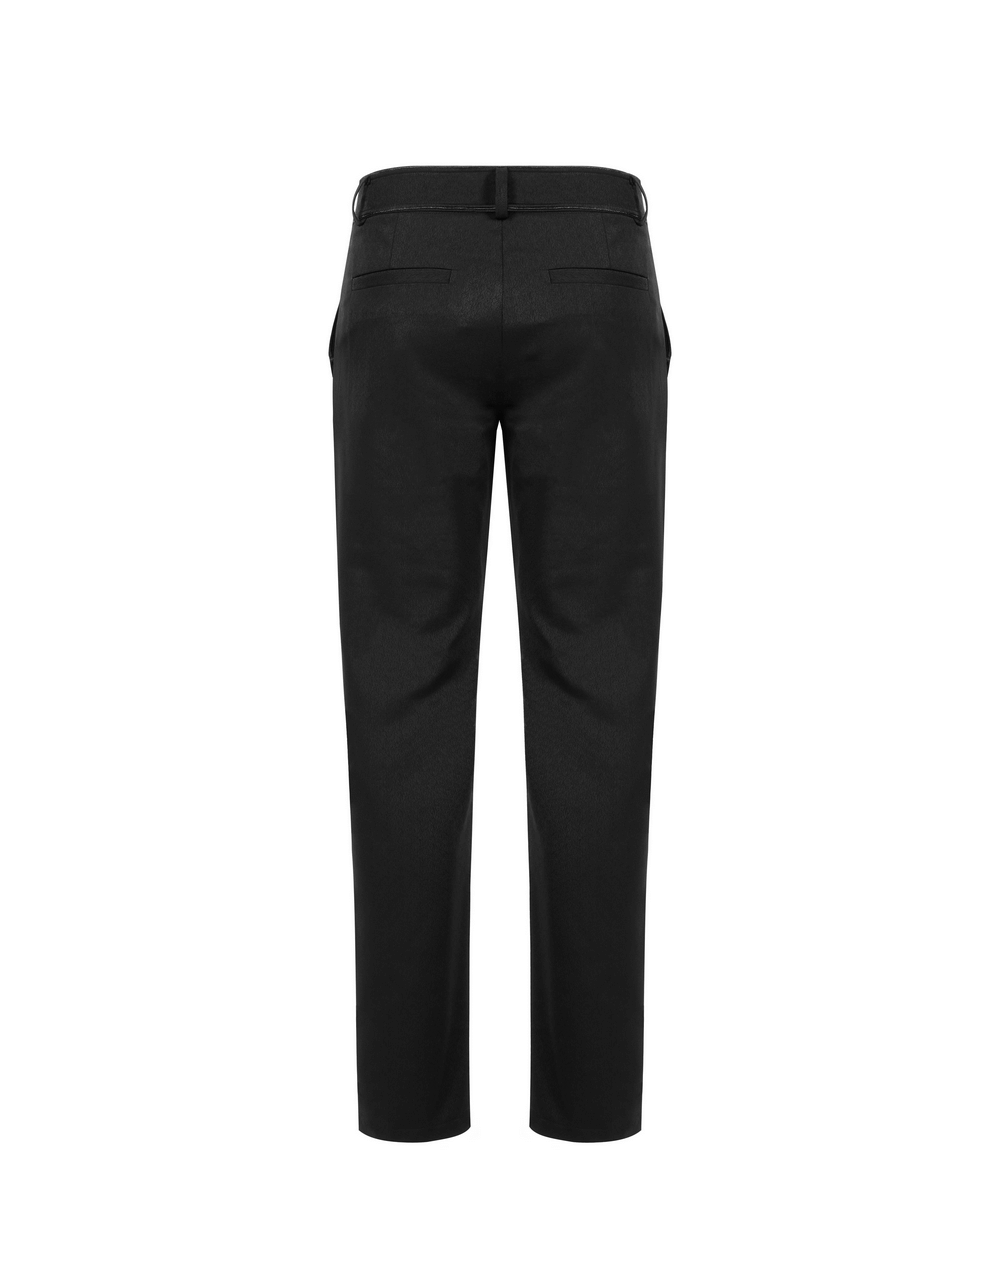 Men's Trousers: Cargo Pants, Biker Jeans and more